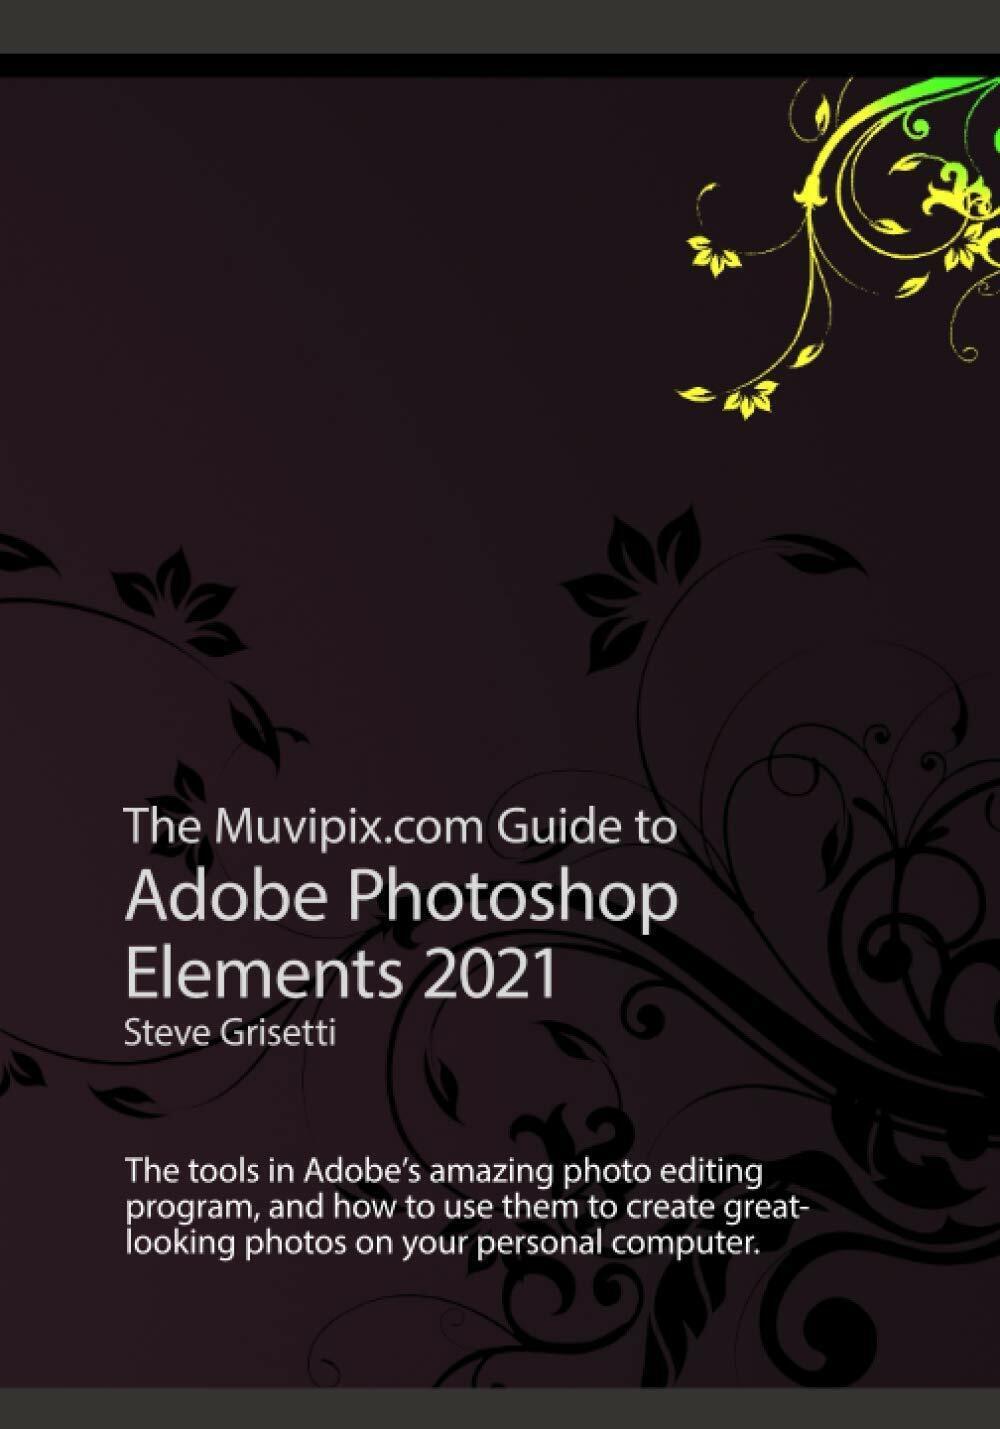 The Muvipix.com Guide to Adobe Photoshop Elements 2021: The tools, and how to us